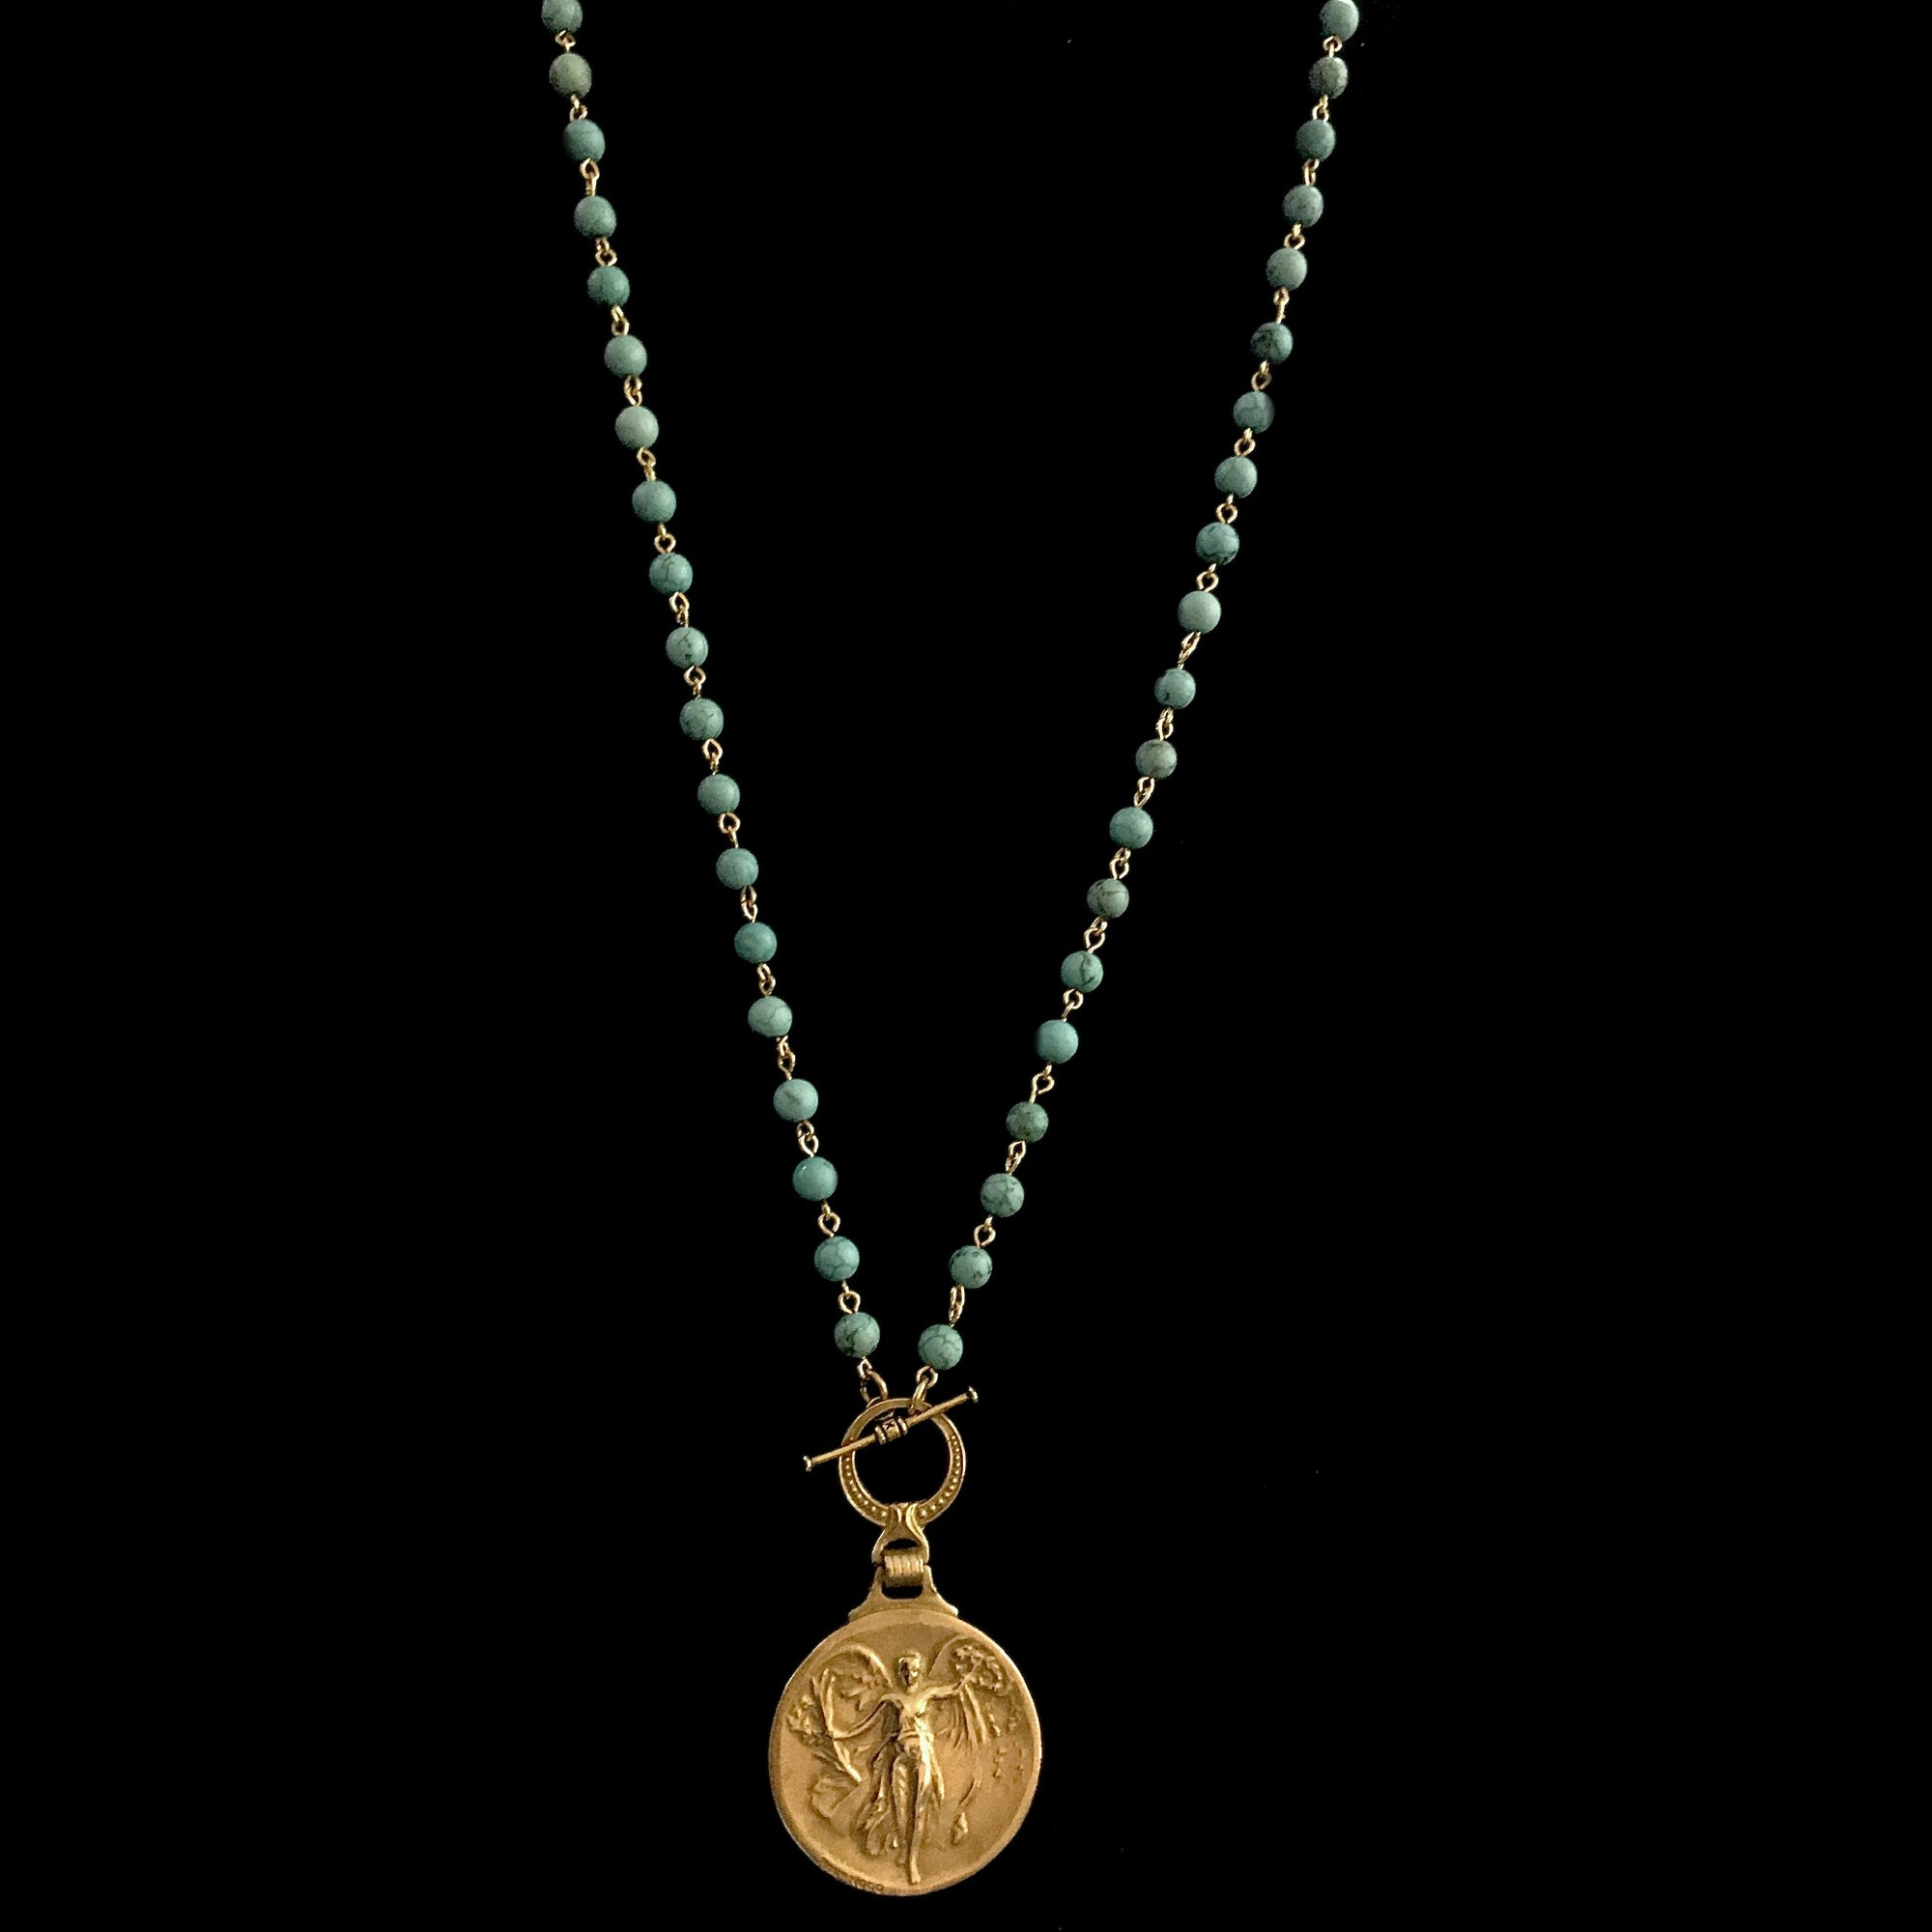 Petite Nike The Goddess of Victory Necklace - Matte Gold 16